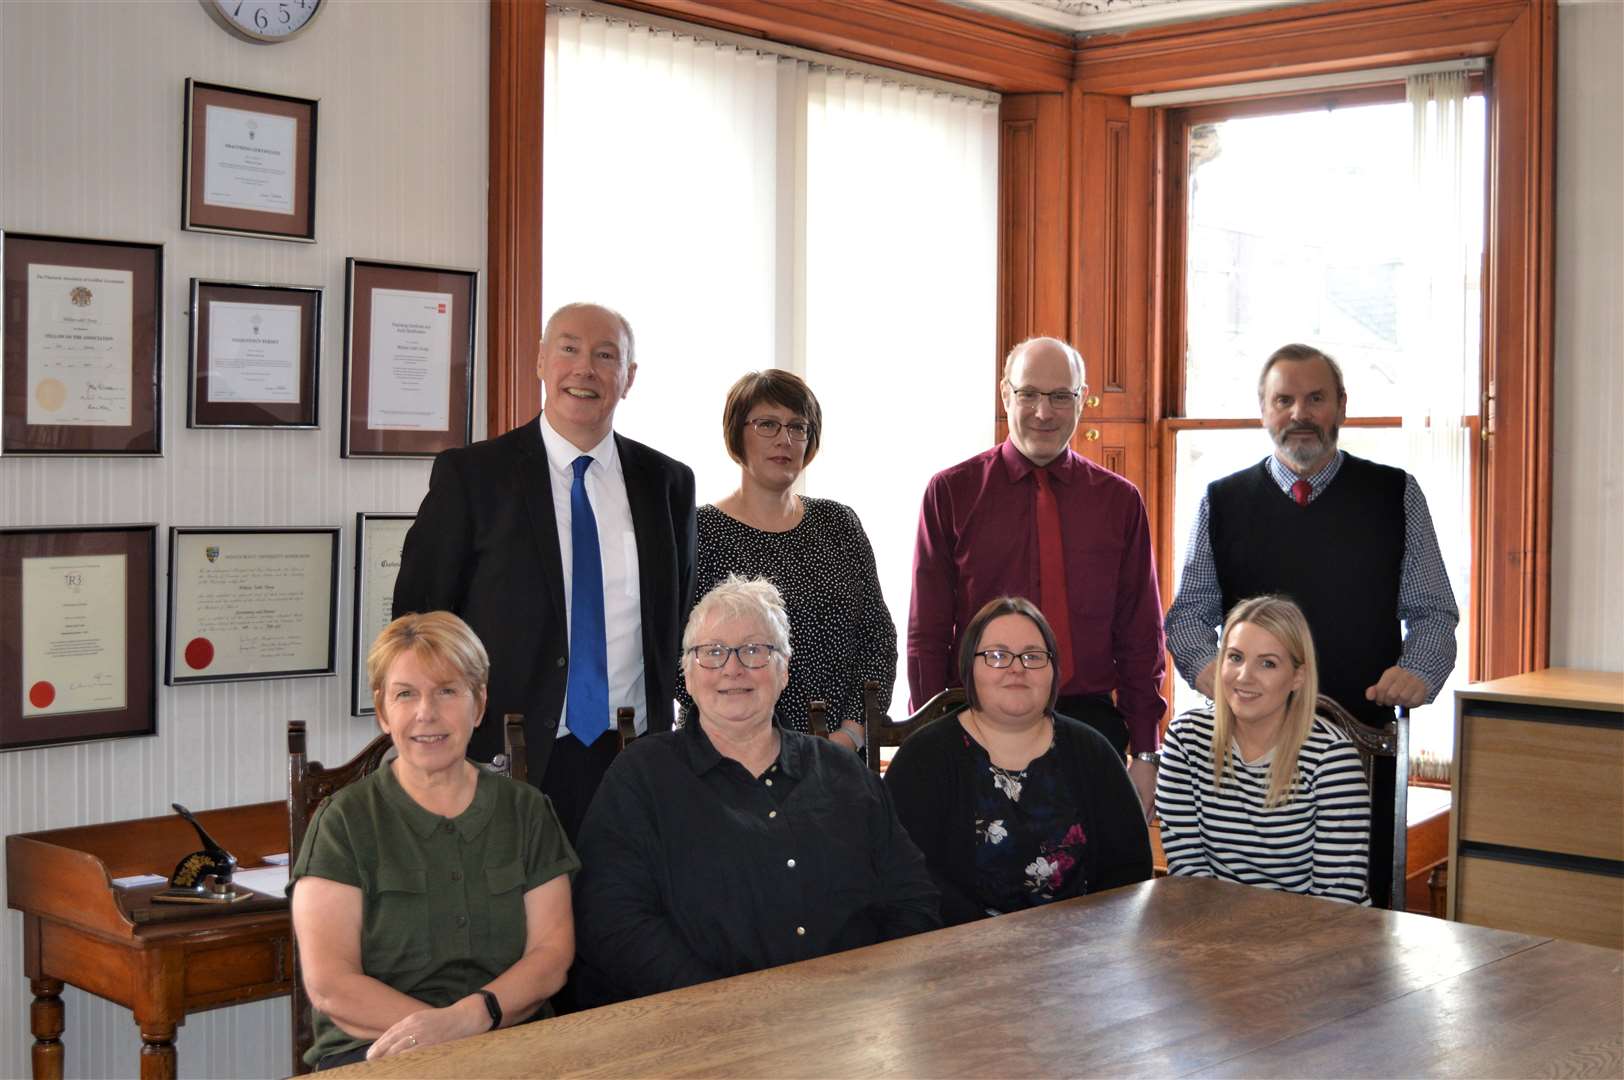 Ritson Young's team in Nairn: Back - left to right - Steven Bain, Julie Thouless, Philip Konczak, Bill YoungFront left to right – Gillian Cruden, Susan Clark, Nikki Baird, Mairi Main